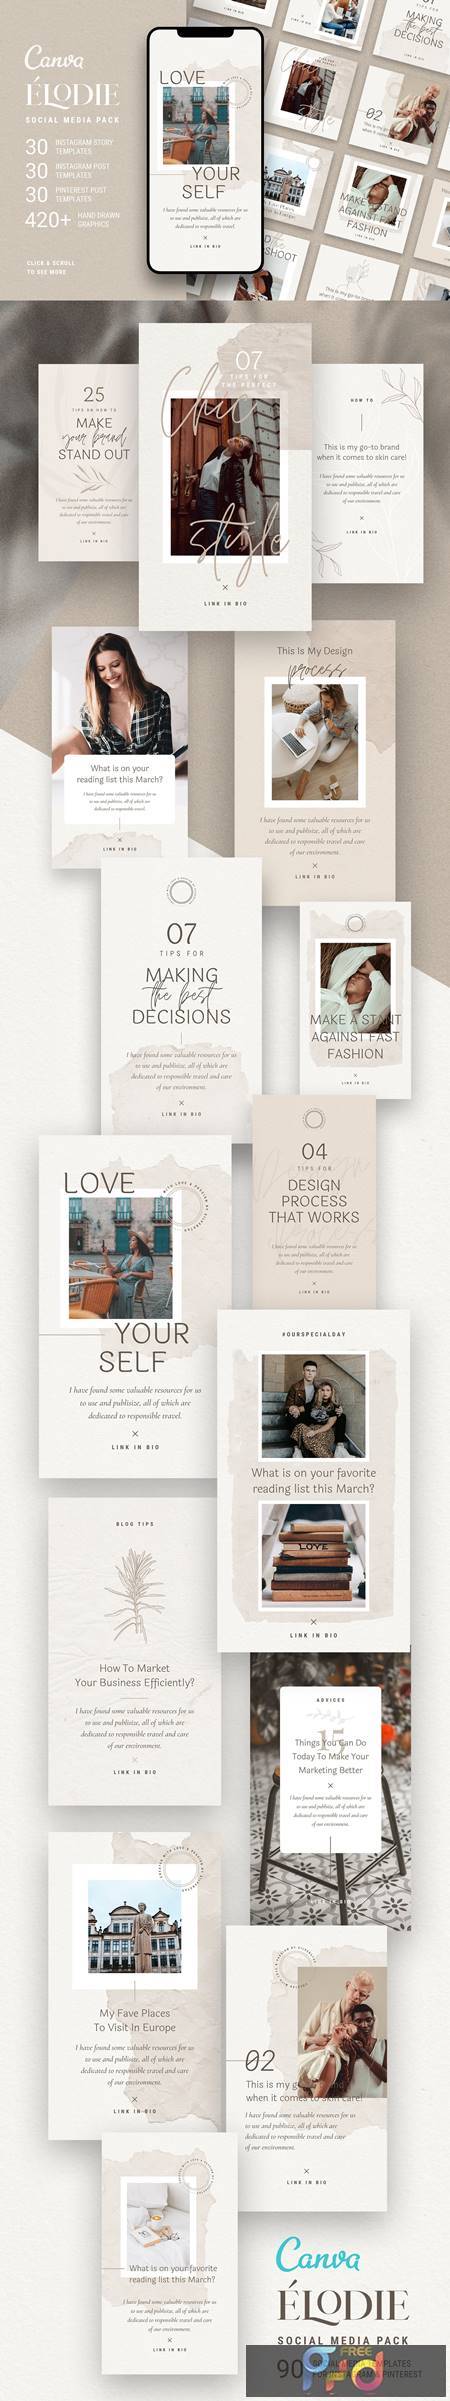 Elodie - Canva Social Templates Pack 4767084 1